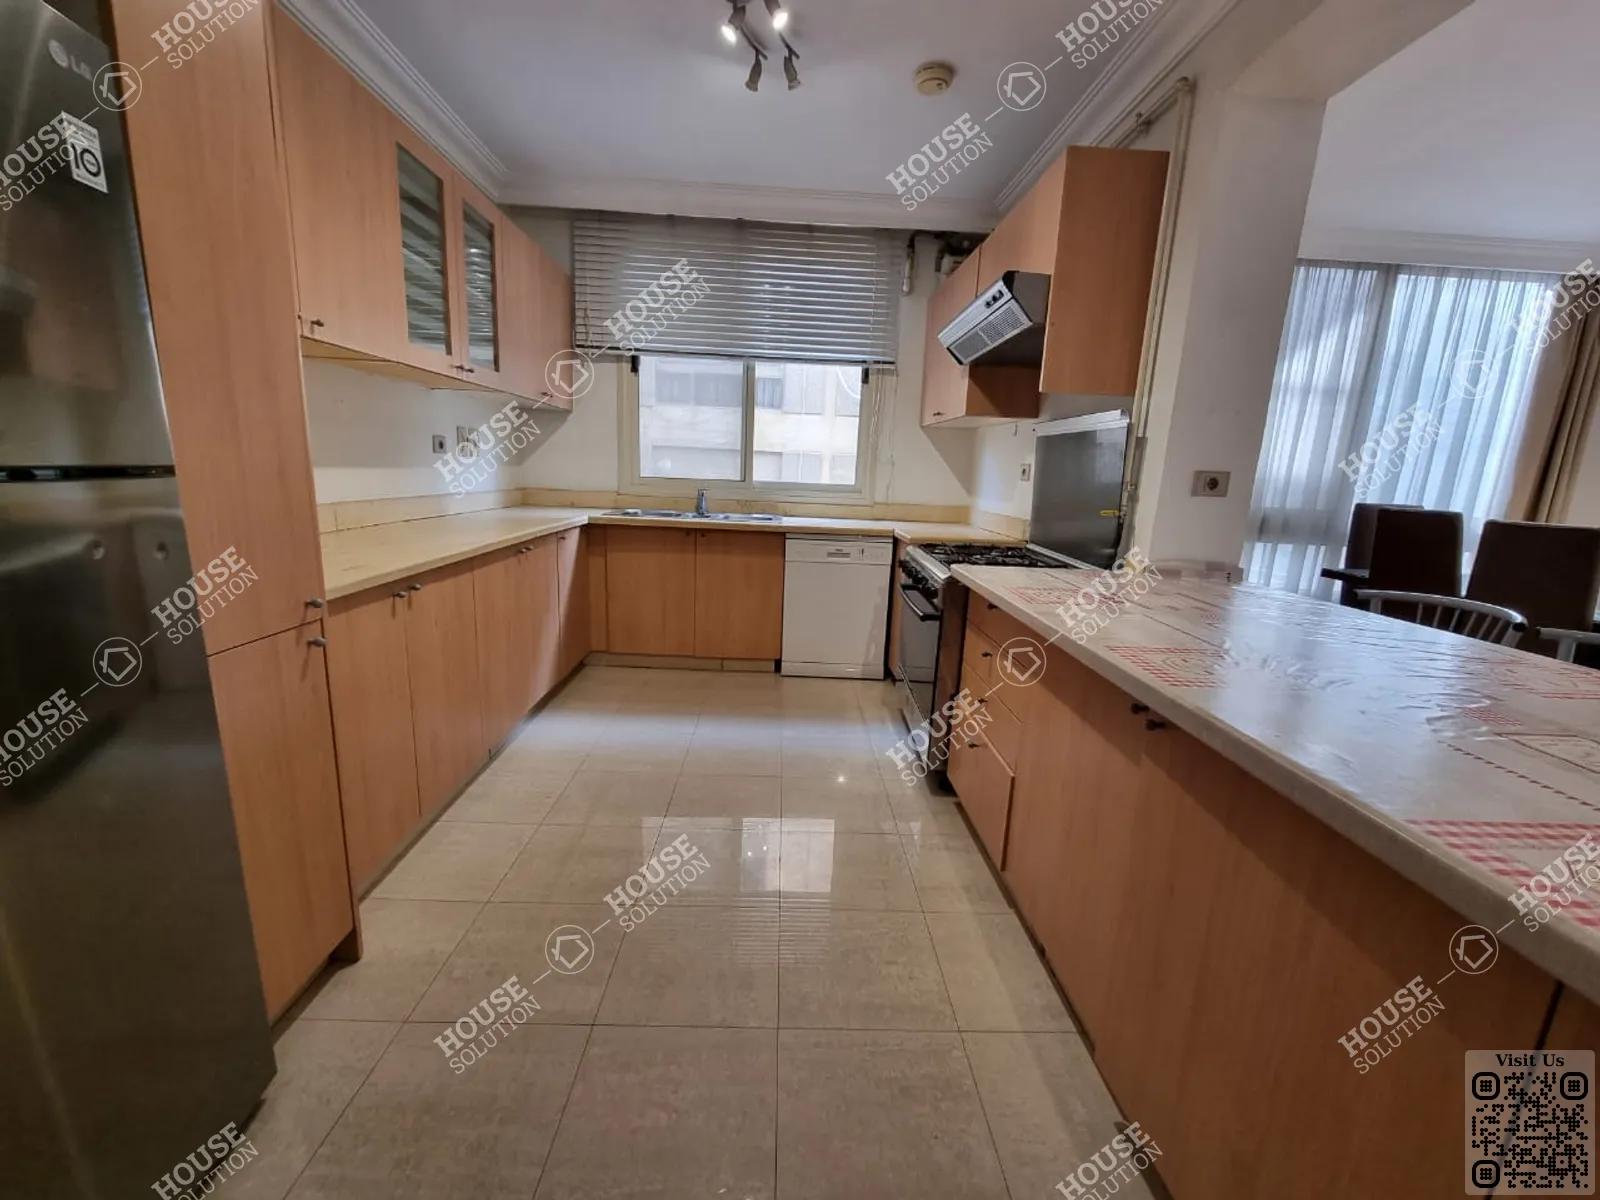 KITCHEN  @ Apartments For Rent In Maadi Maadi Sarayat Area: 280 m² consists of 4 Bedrooms 4 Bathrooms Modern furnished 5 stars #5420-2